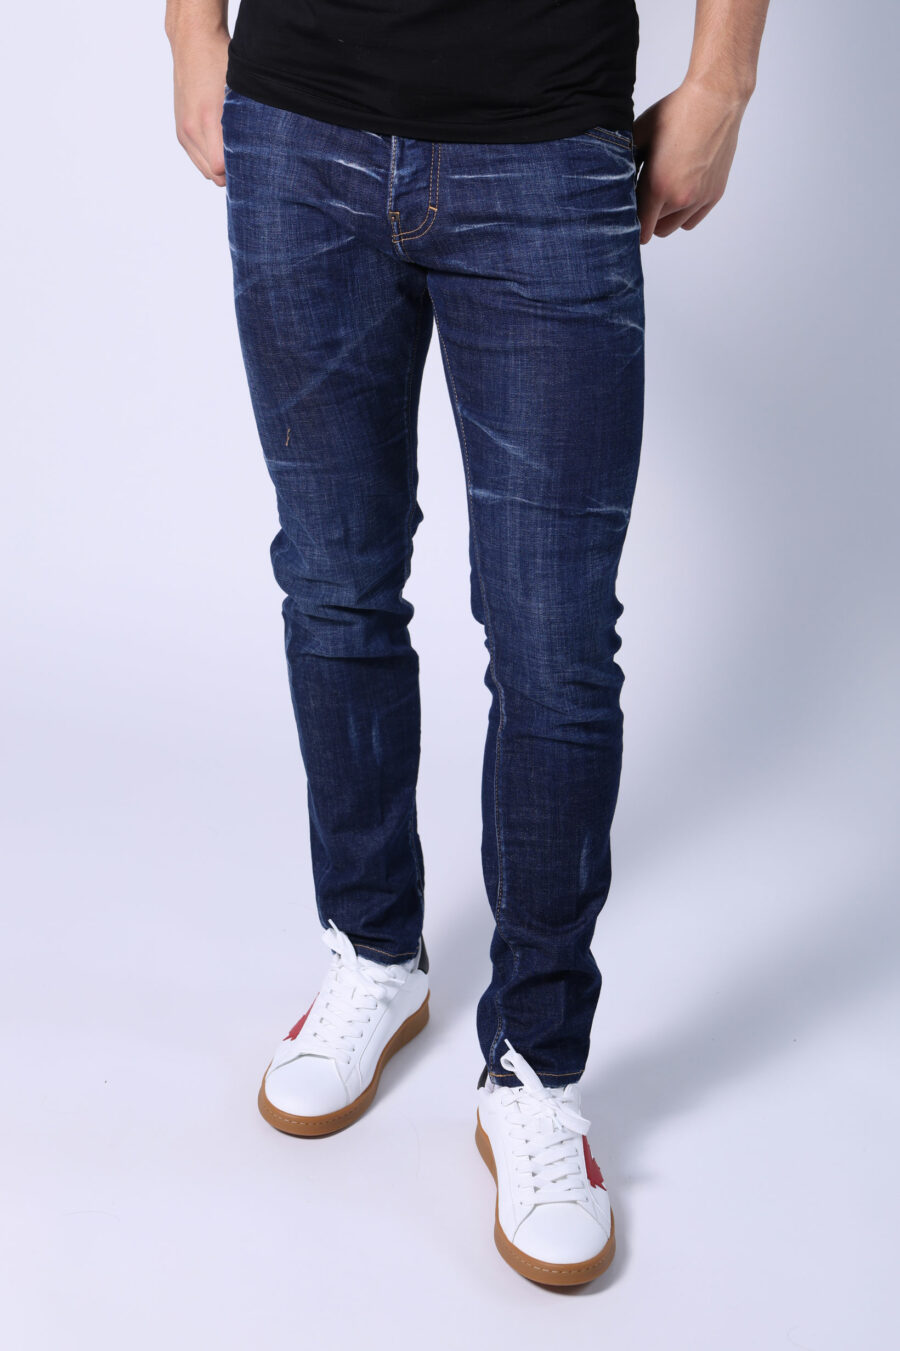 Cool guy jean trousers blue semi frayed - Untitled Catalog 05497